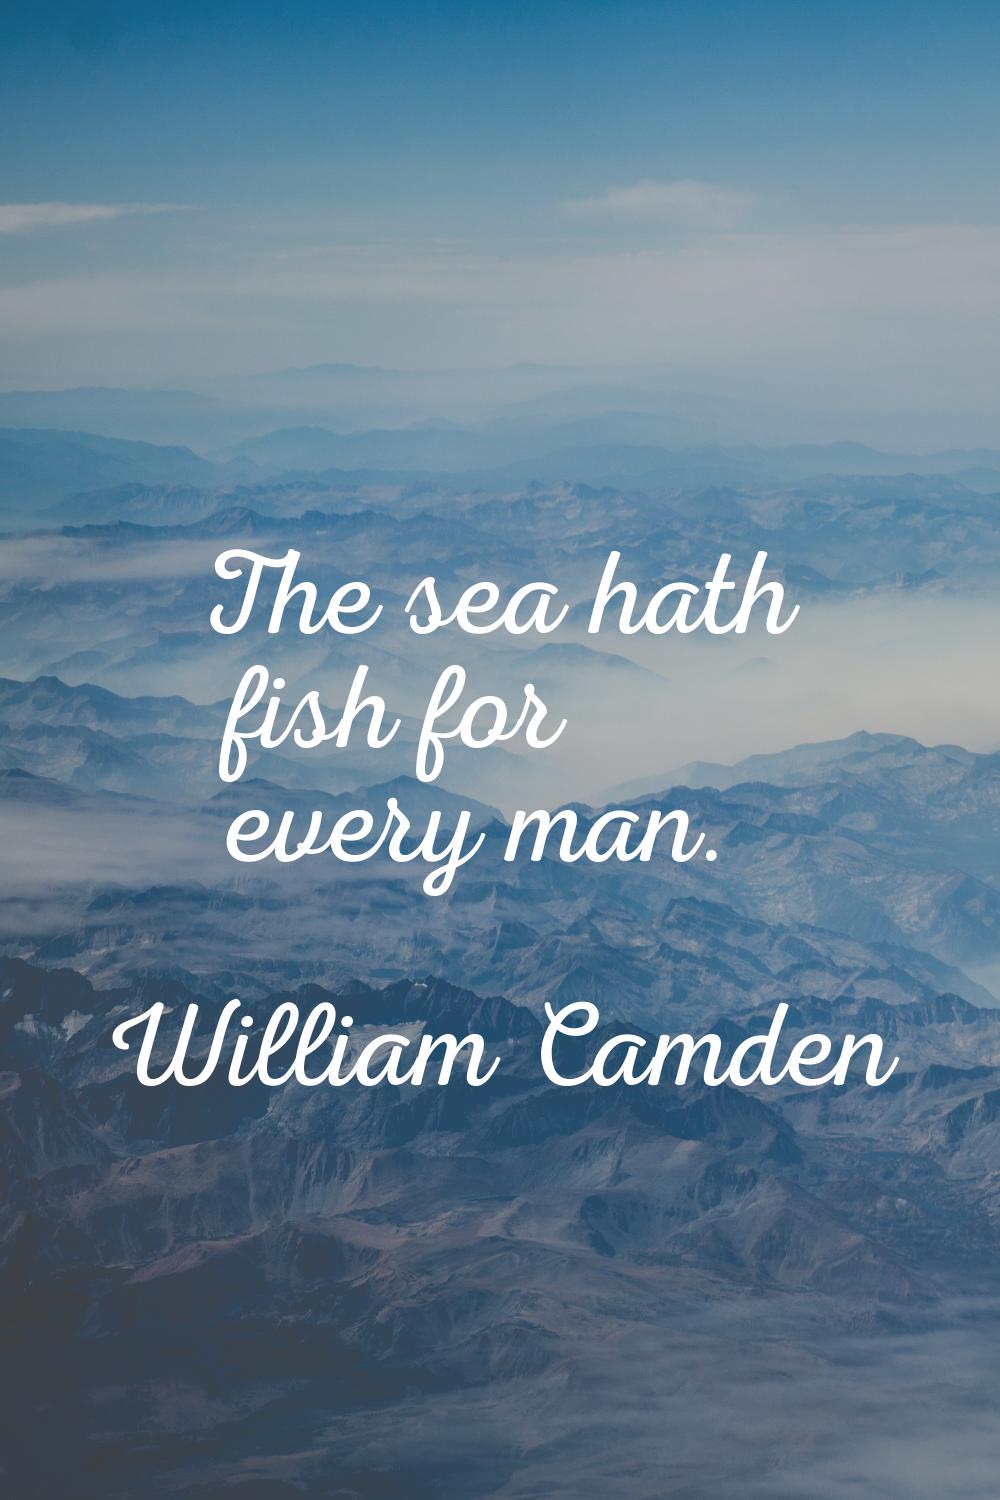 The sea hath fish for every man.